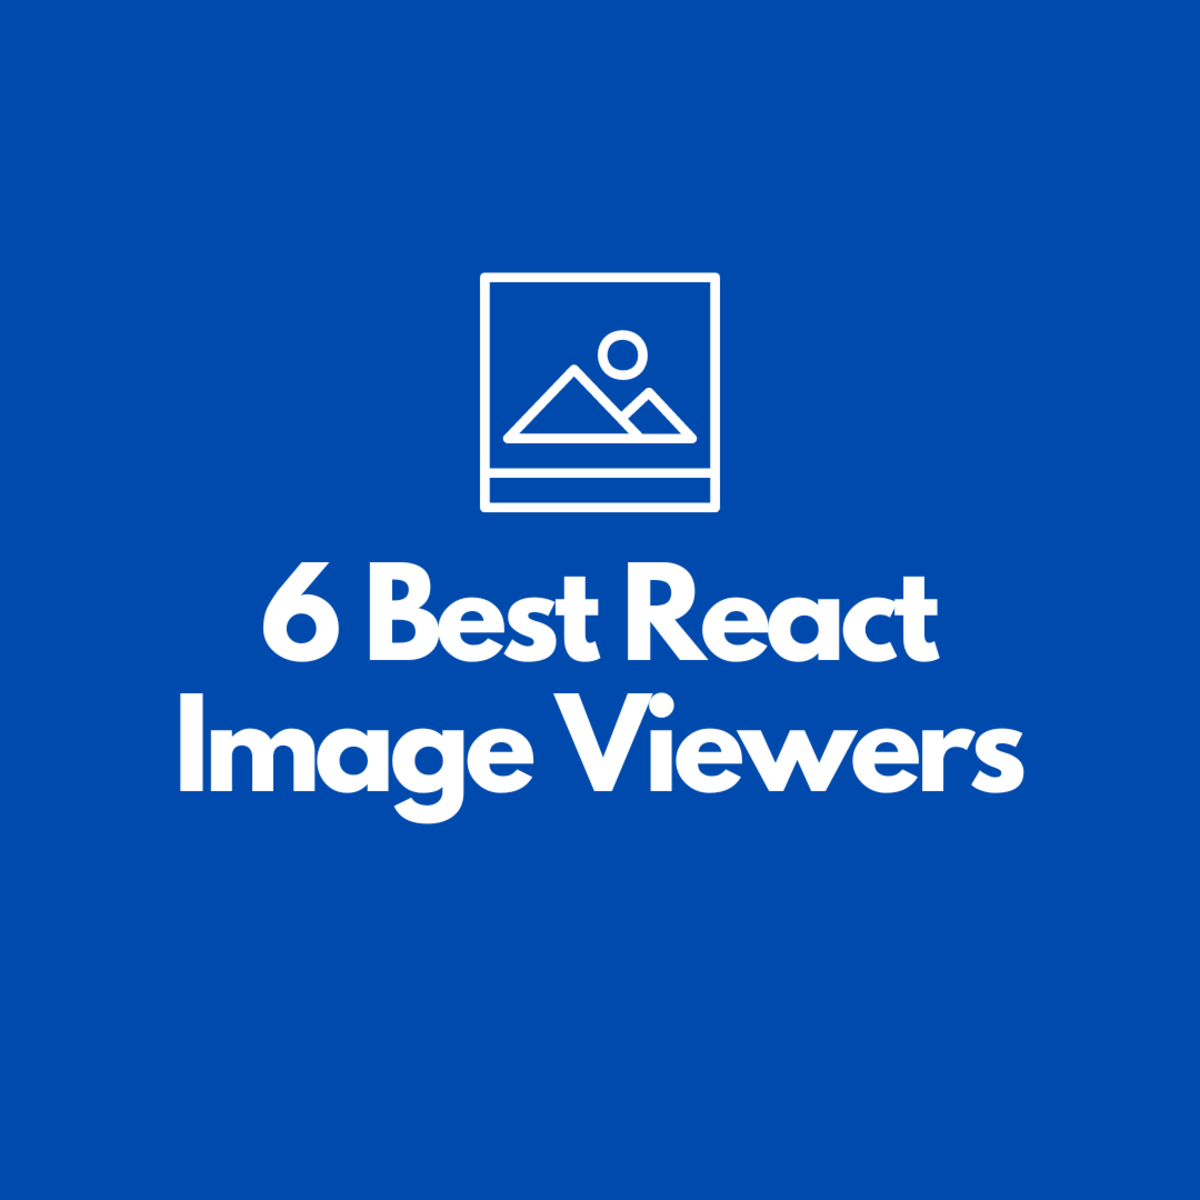 Discover some of the best React image viewers in this comprehensive guide, where we'll be including the main features of each, plus screenshots too!